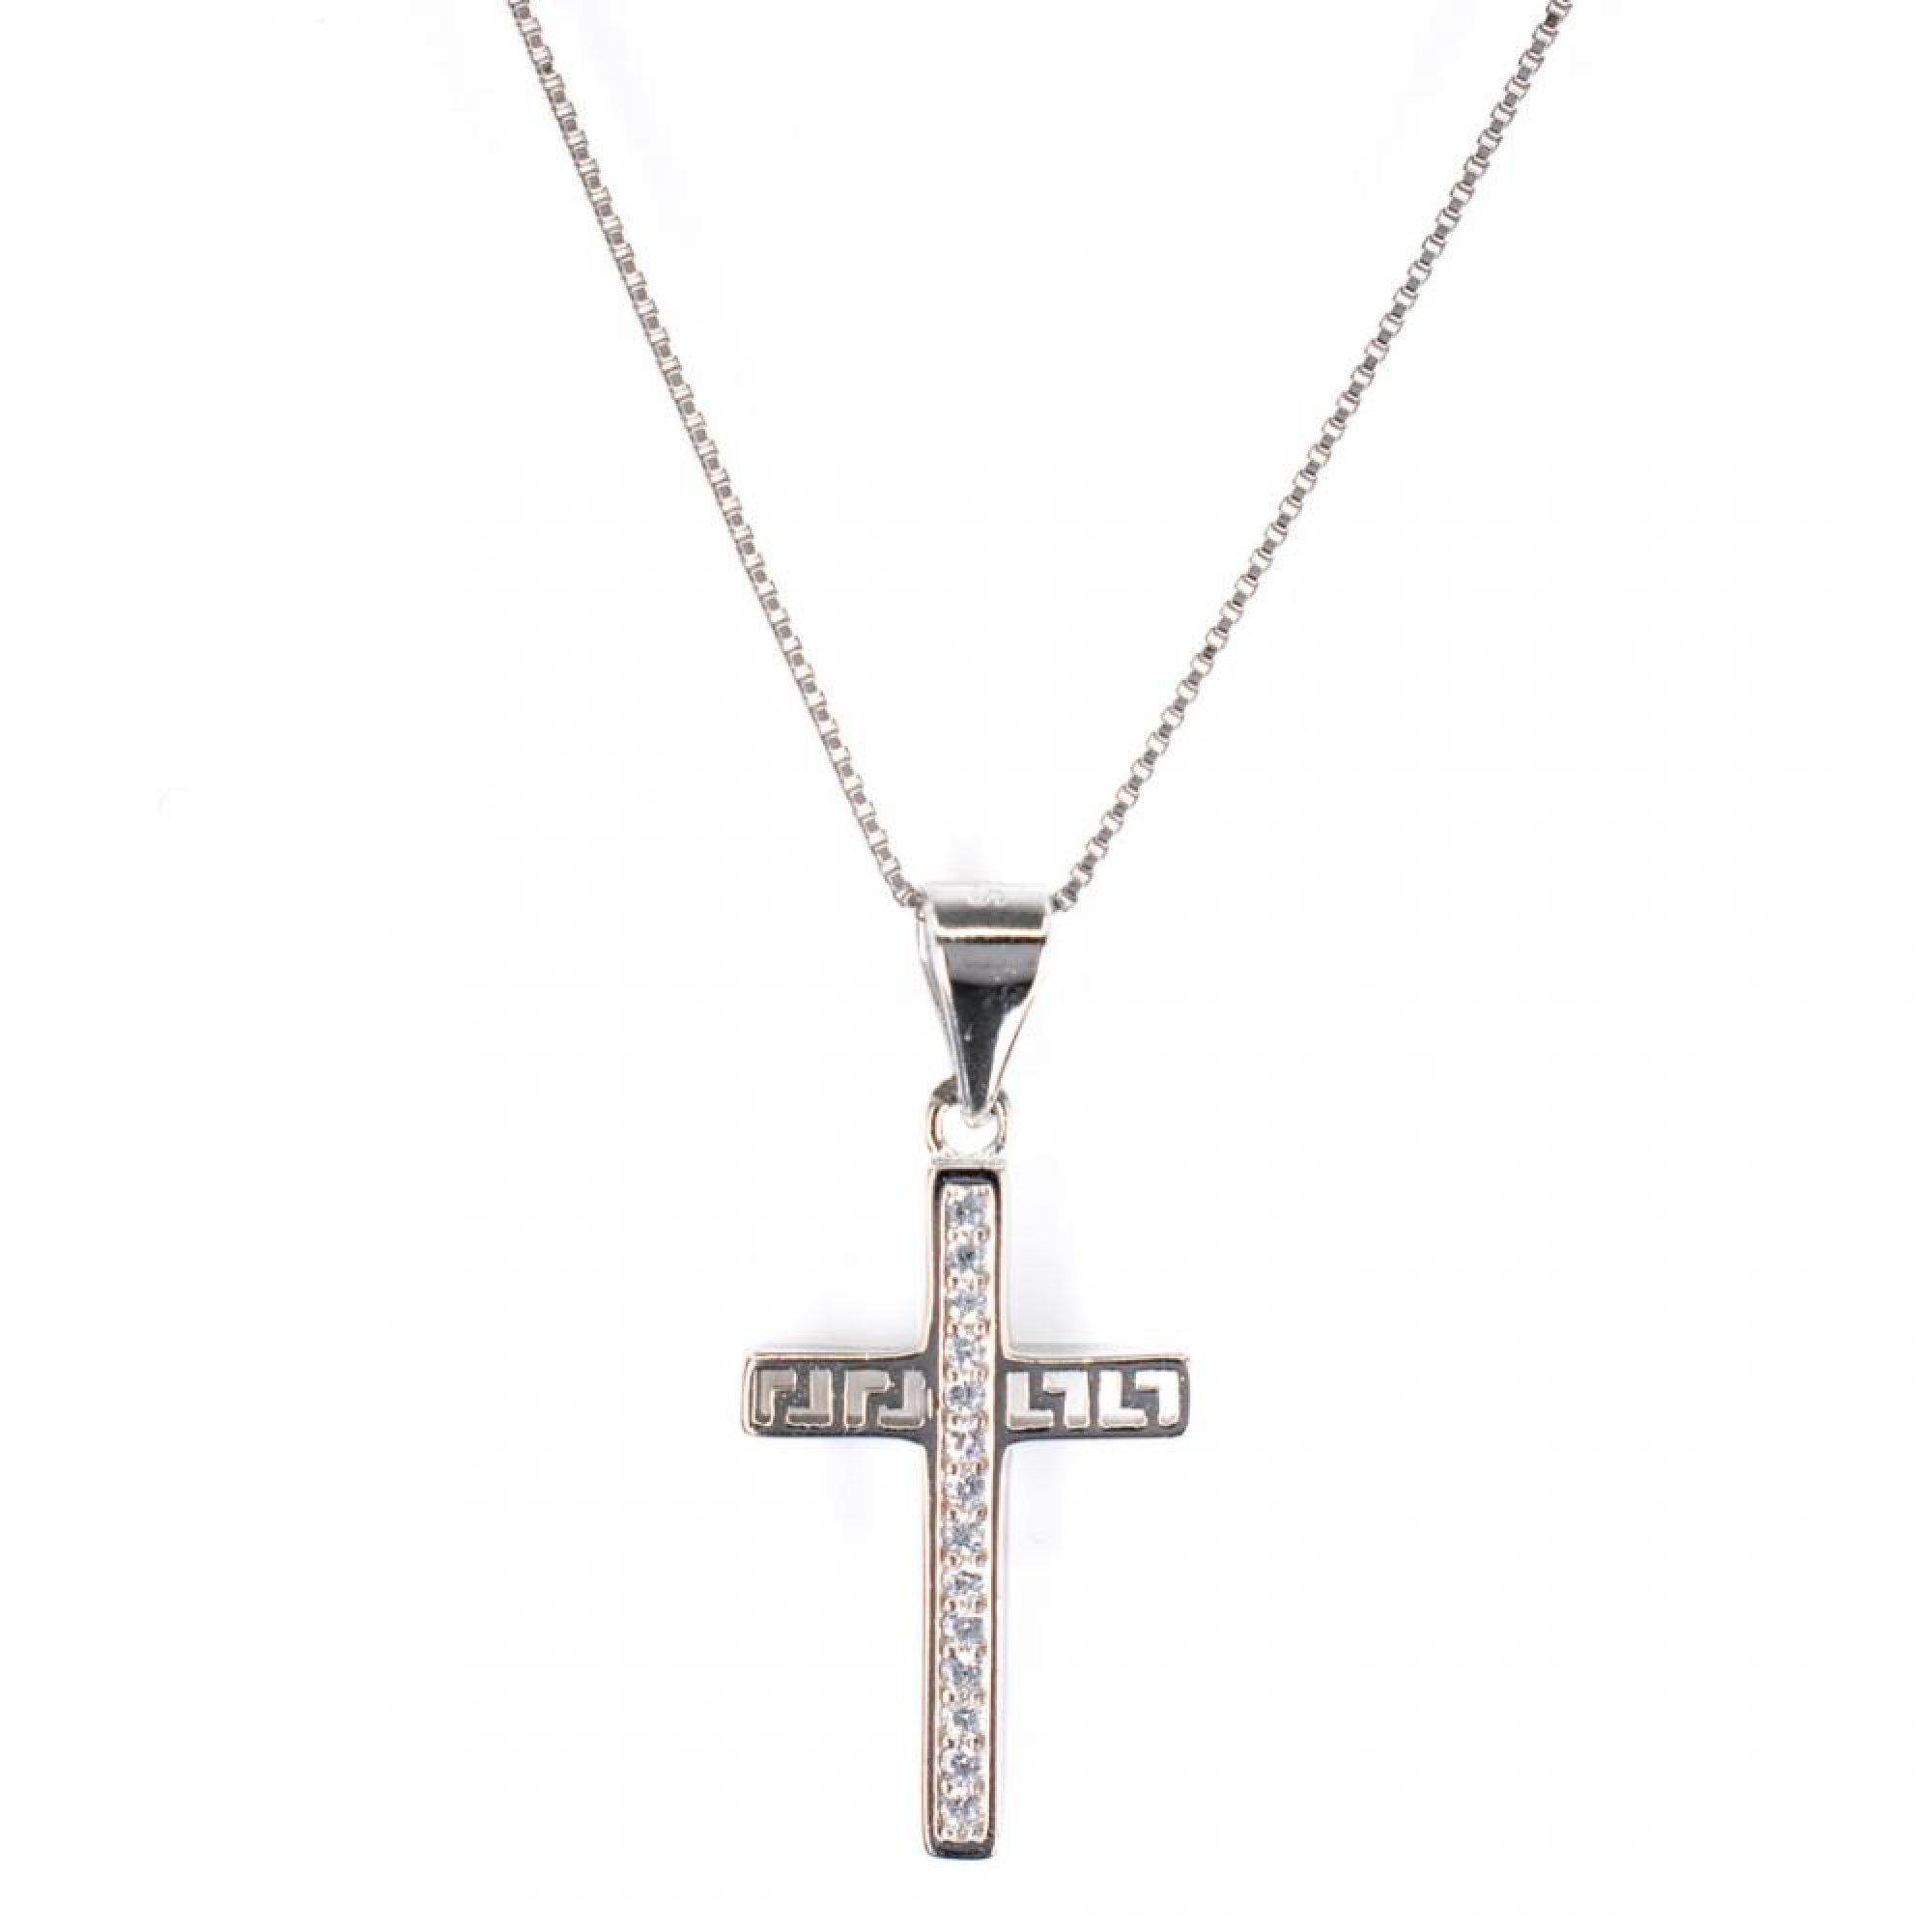 Cross necklace with zircon stones and meander